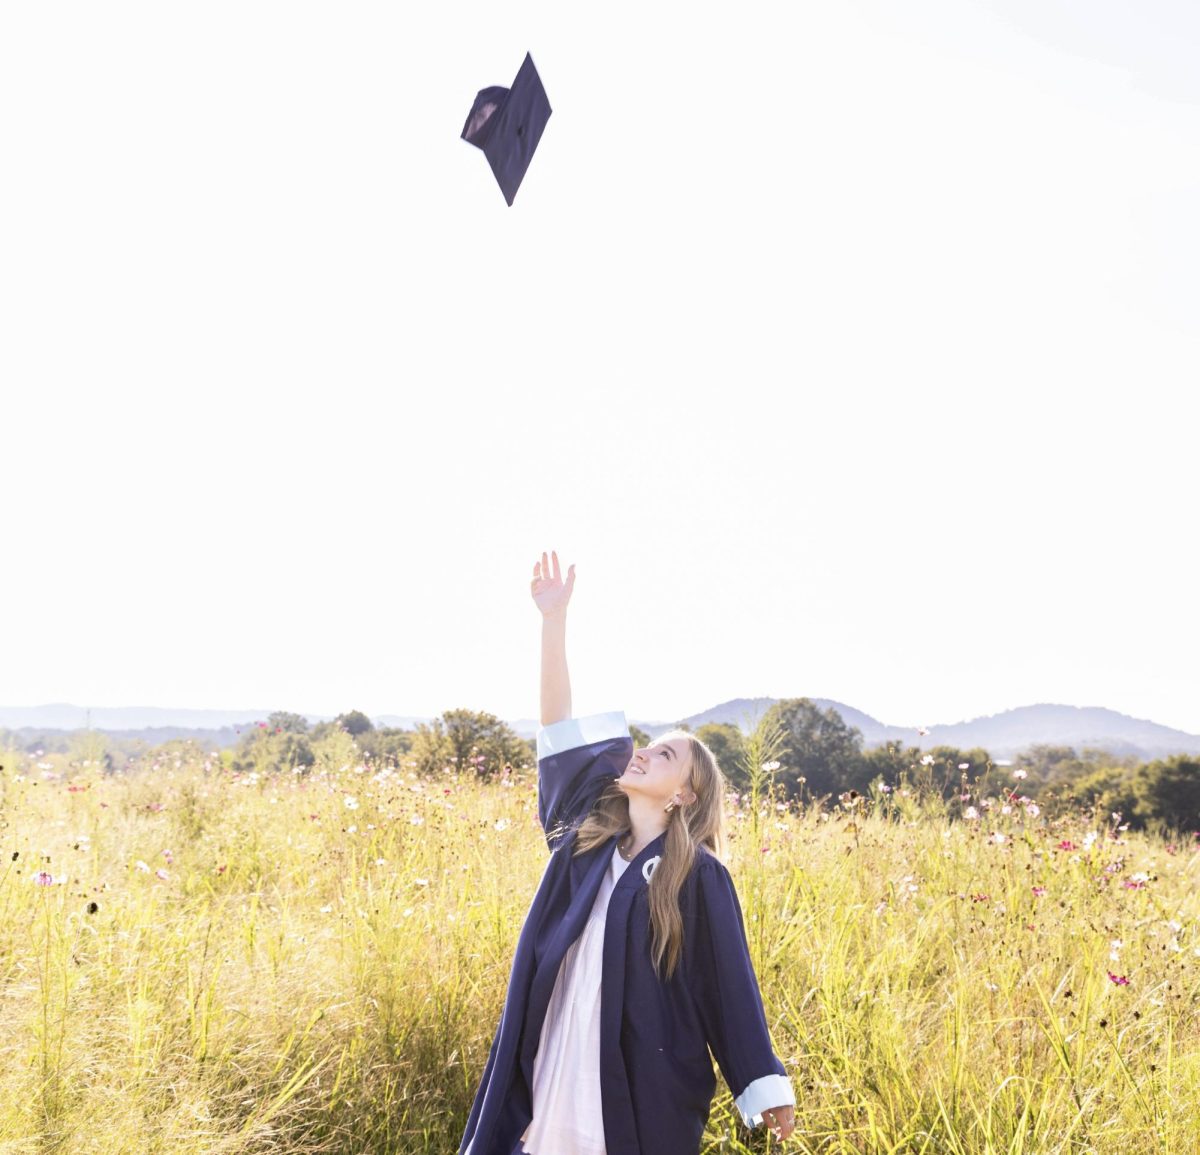 Senior Syra Lundergan mimics the graduate tradition of tossing the cap on Sept. 2 during her senior pictures session.